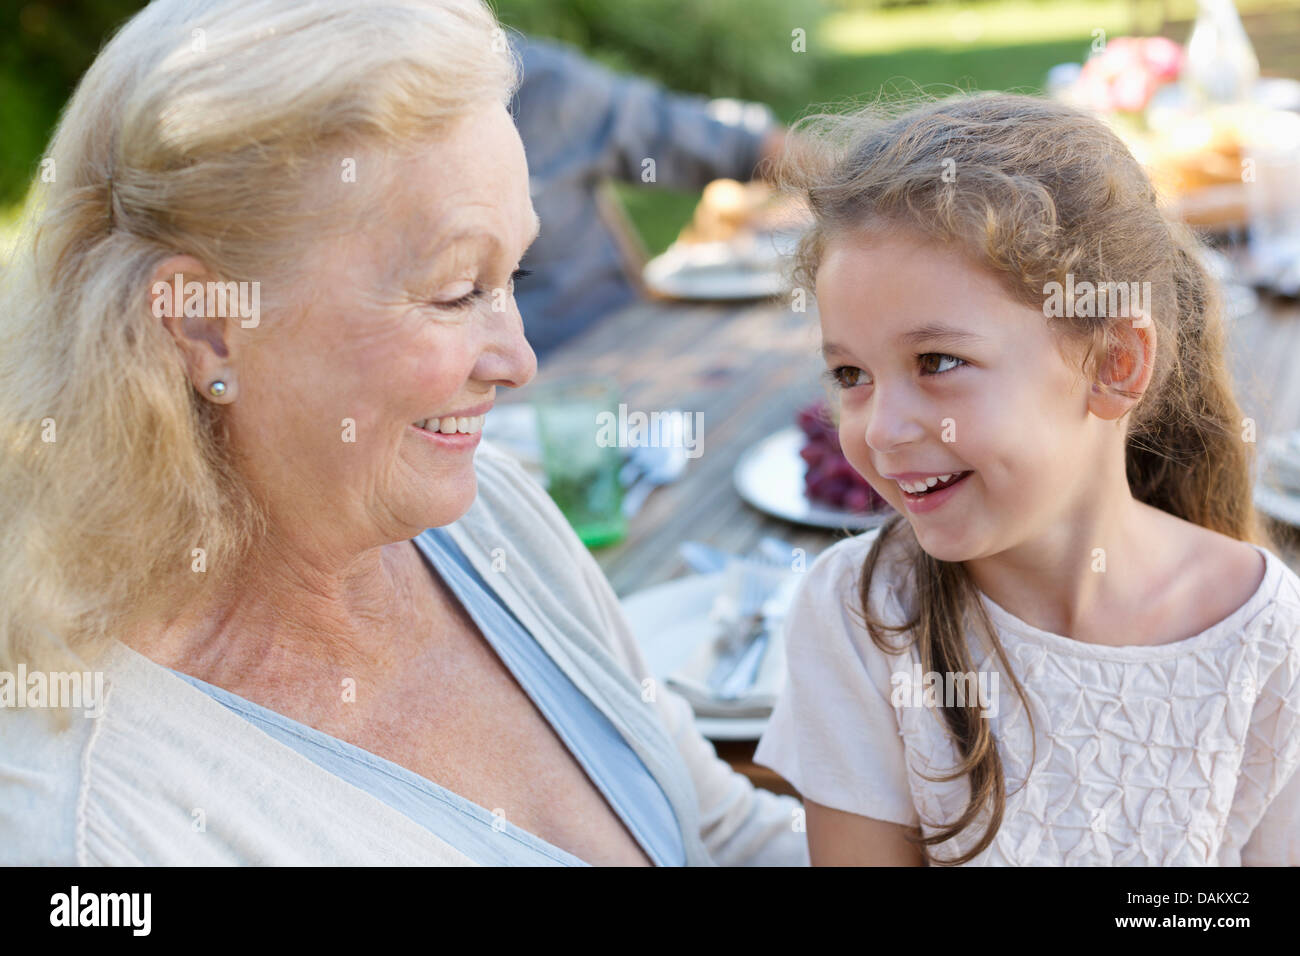 Older woman sitting with granddaughter outdoors Stock Photo